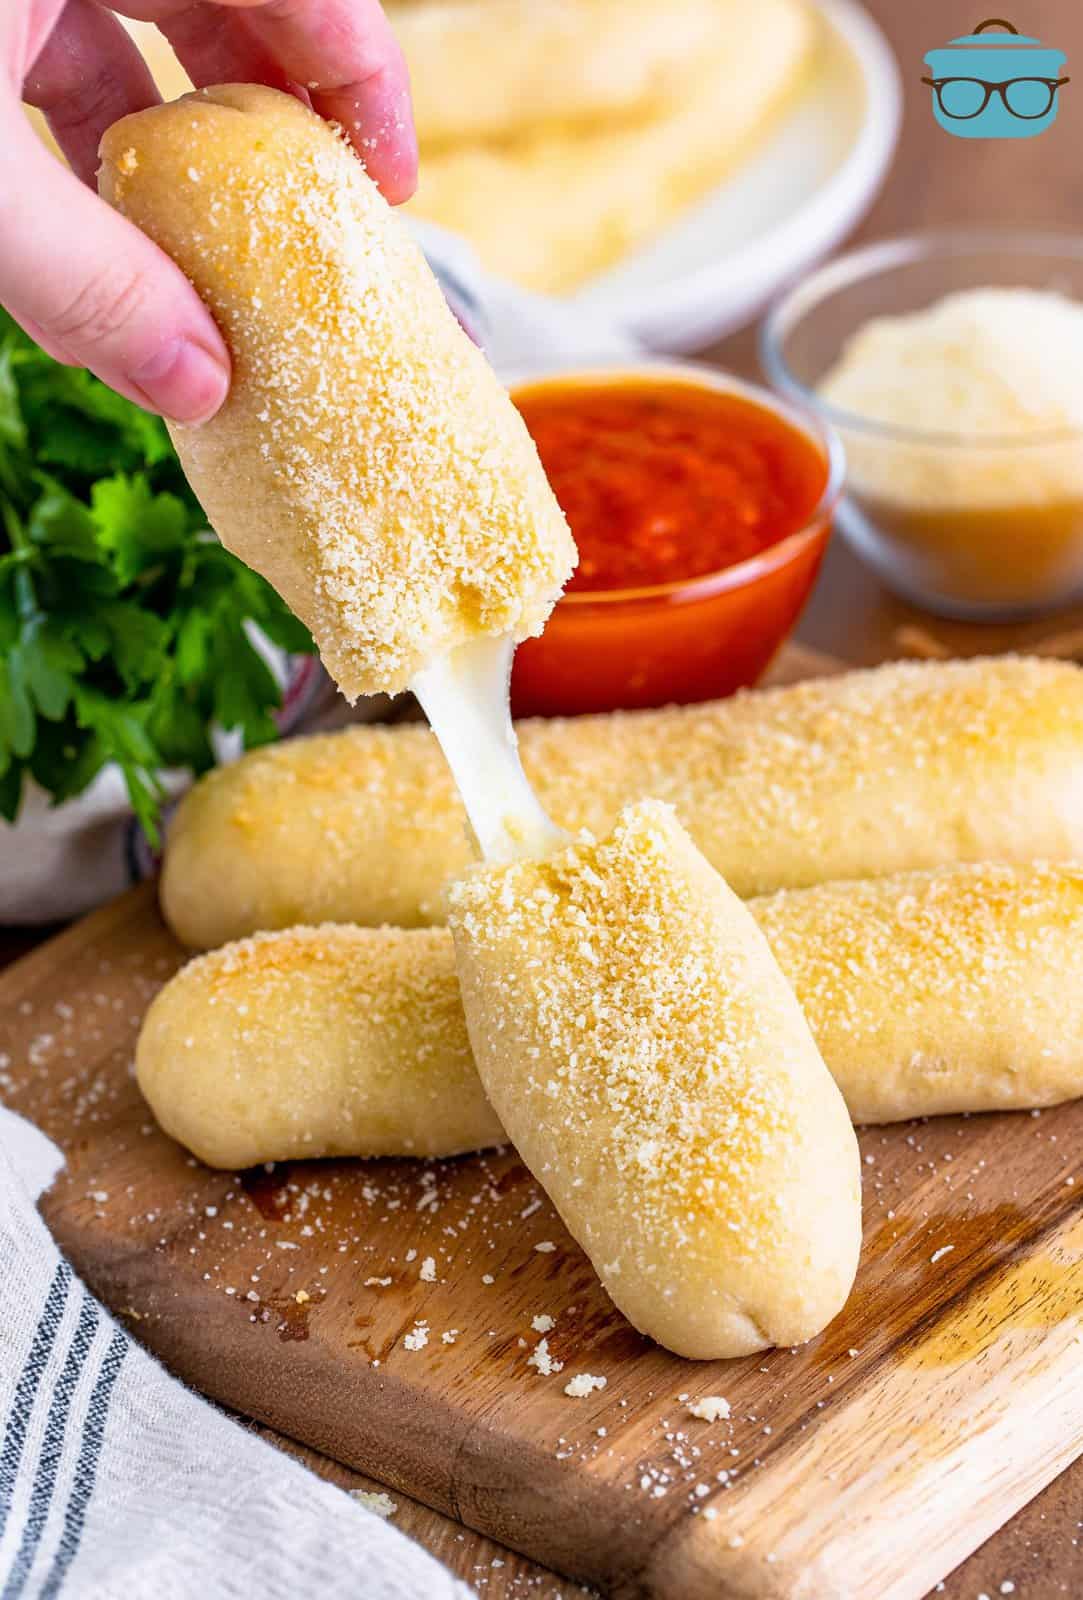 Fingers holding a broken open Bosco stick with mozzarella string cheese hanging between the two pieces.